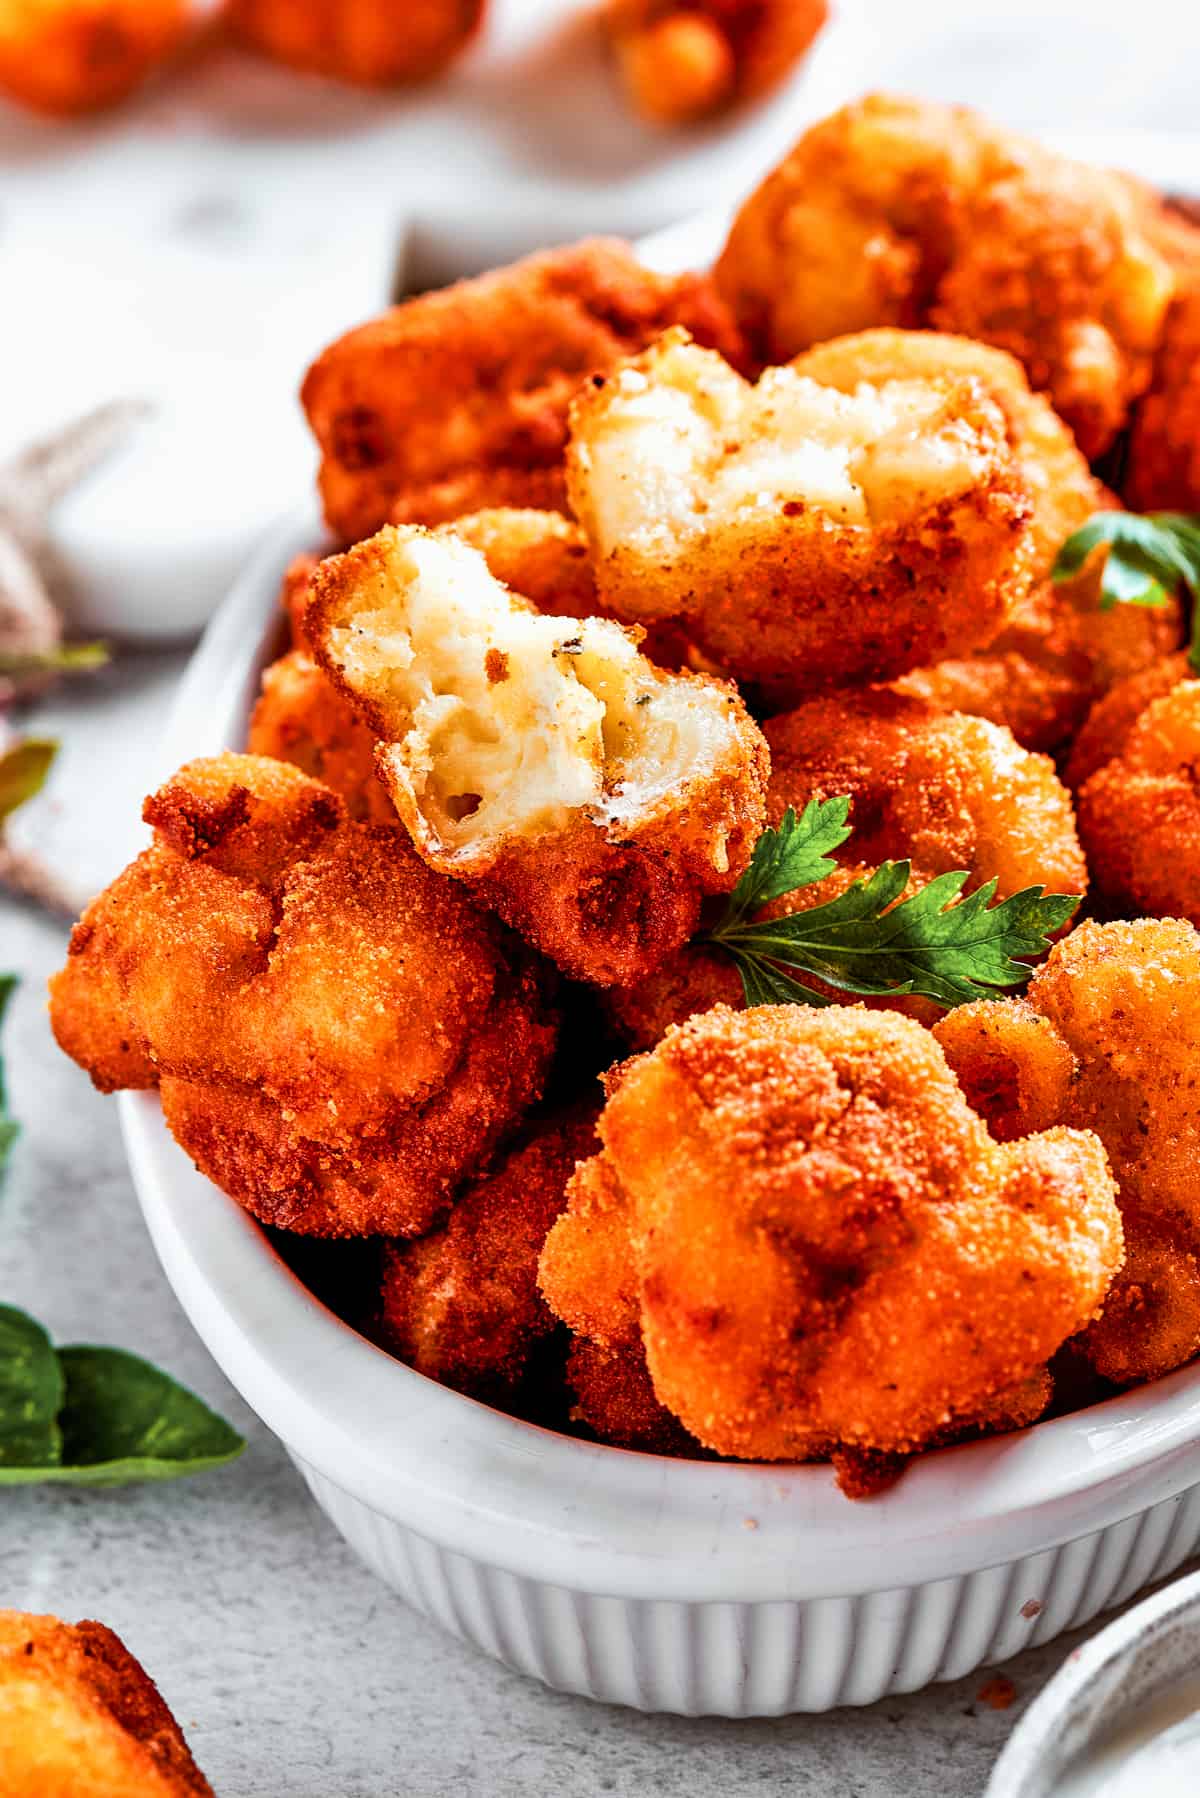 A serving bowl full of fried mac and cheese bites, surrounded by more mac and cheese balls.